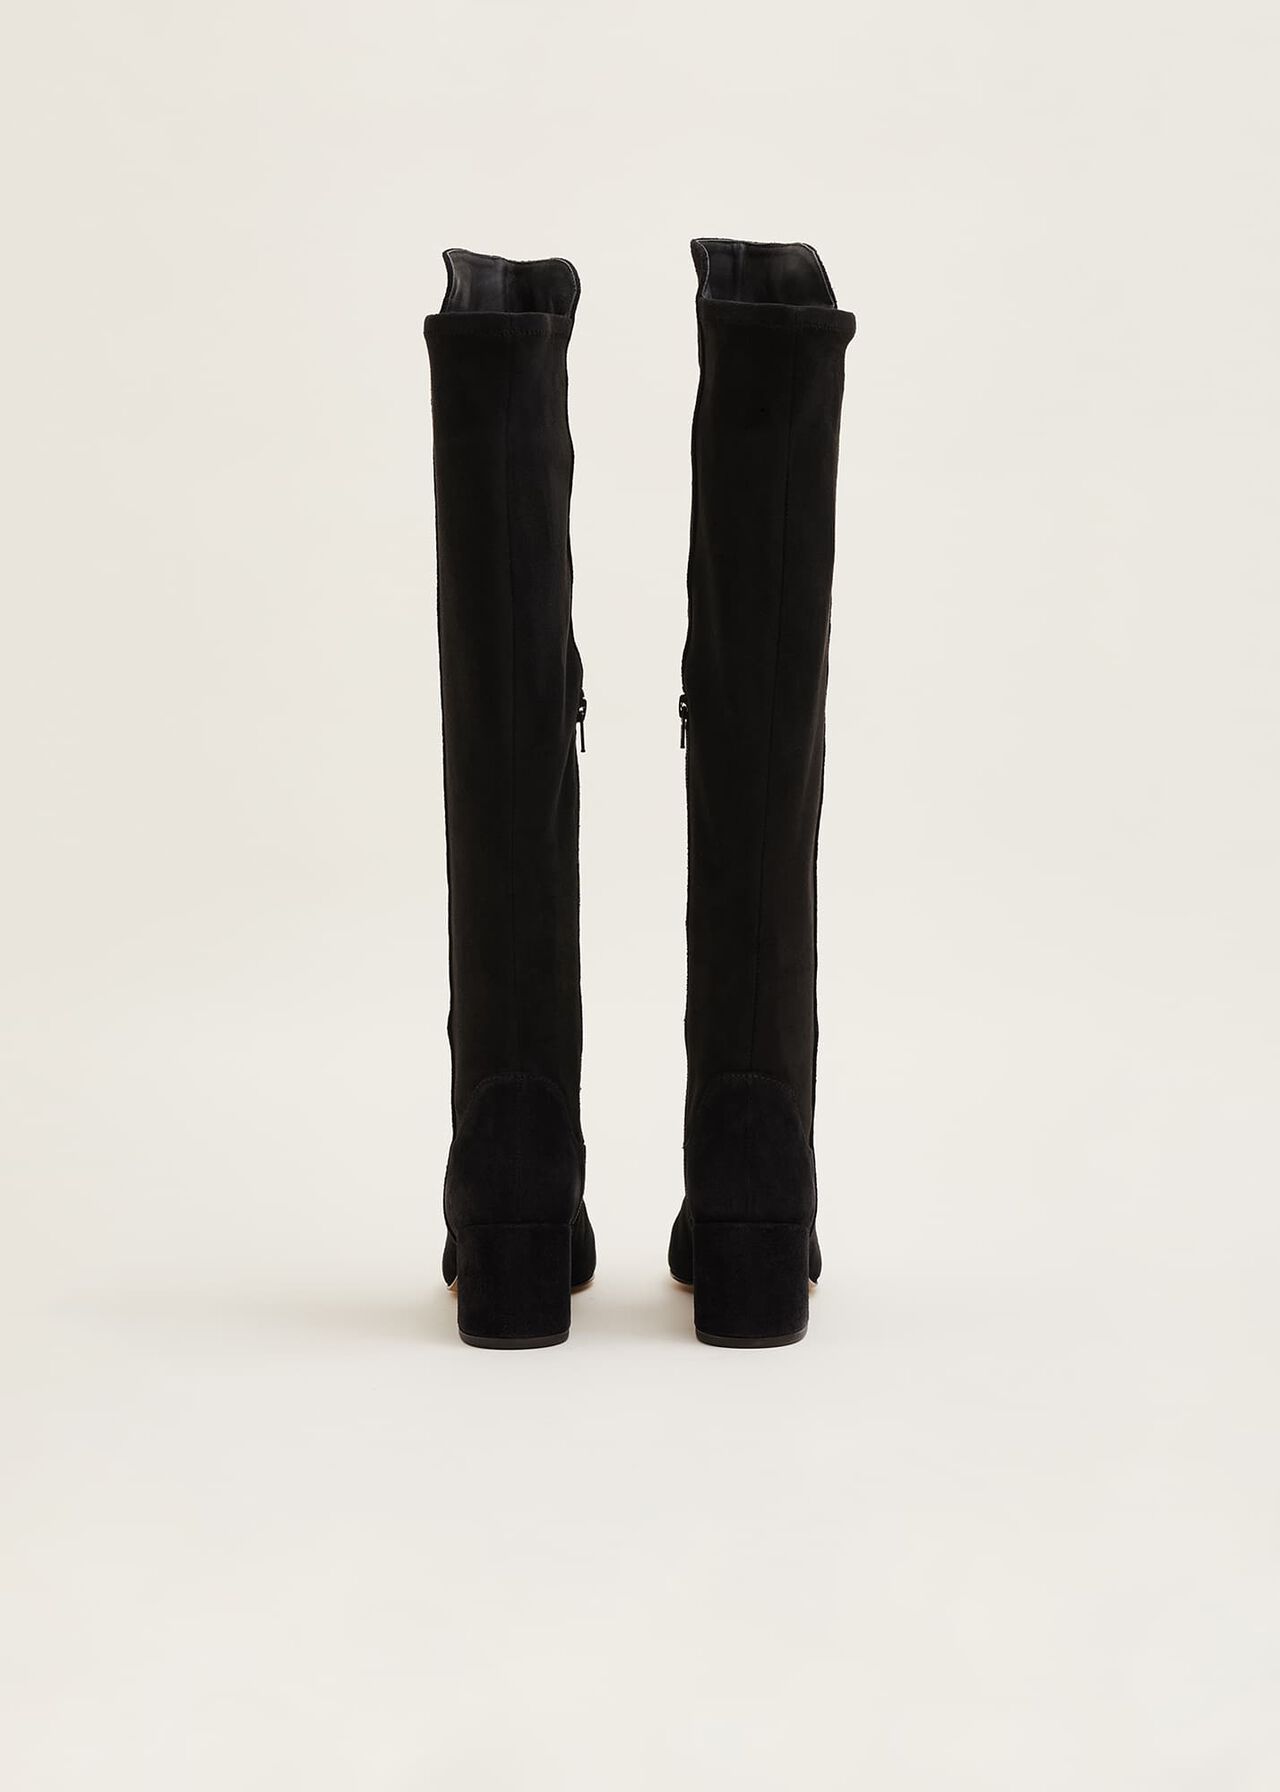 Milly Black Suede Knee Boots